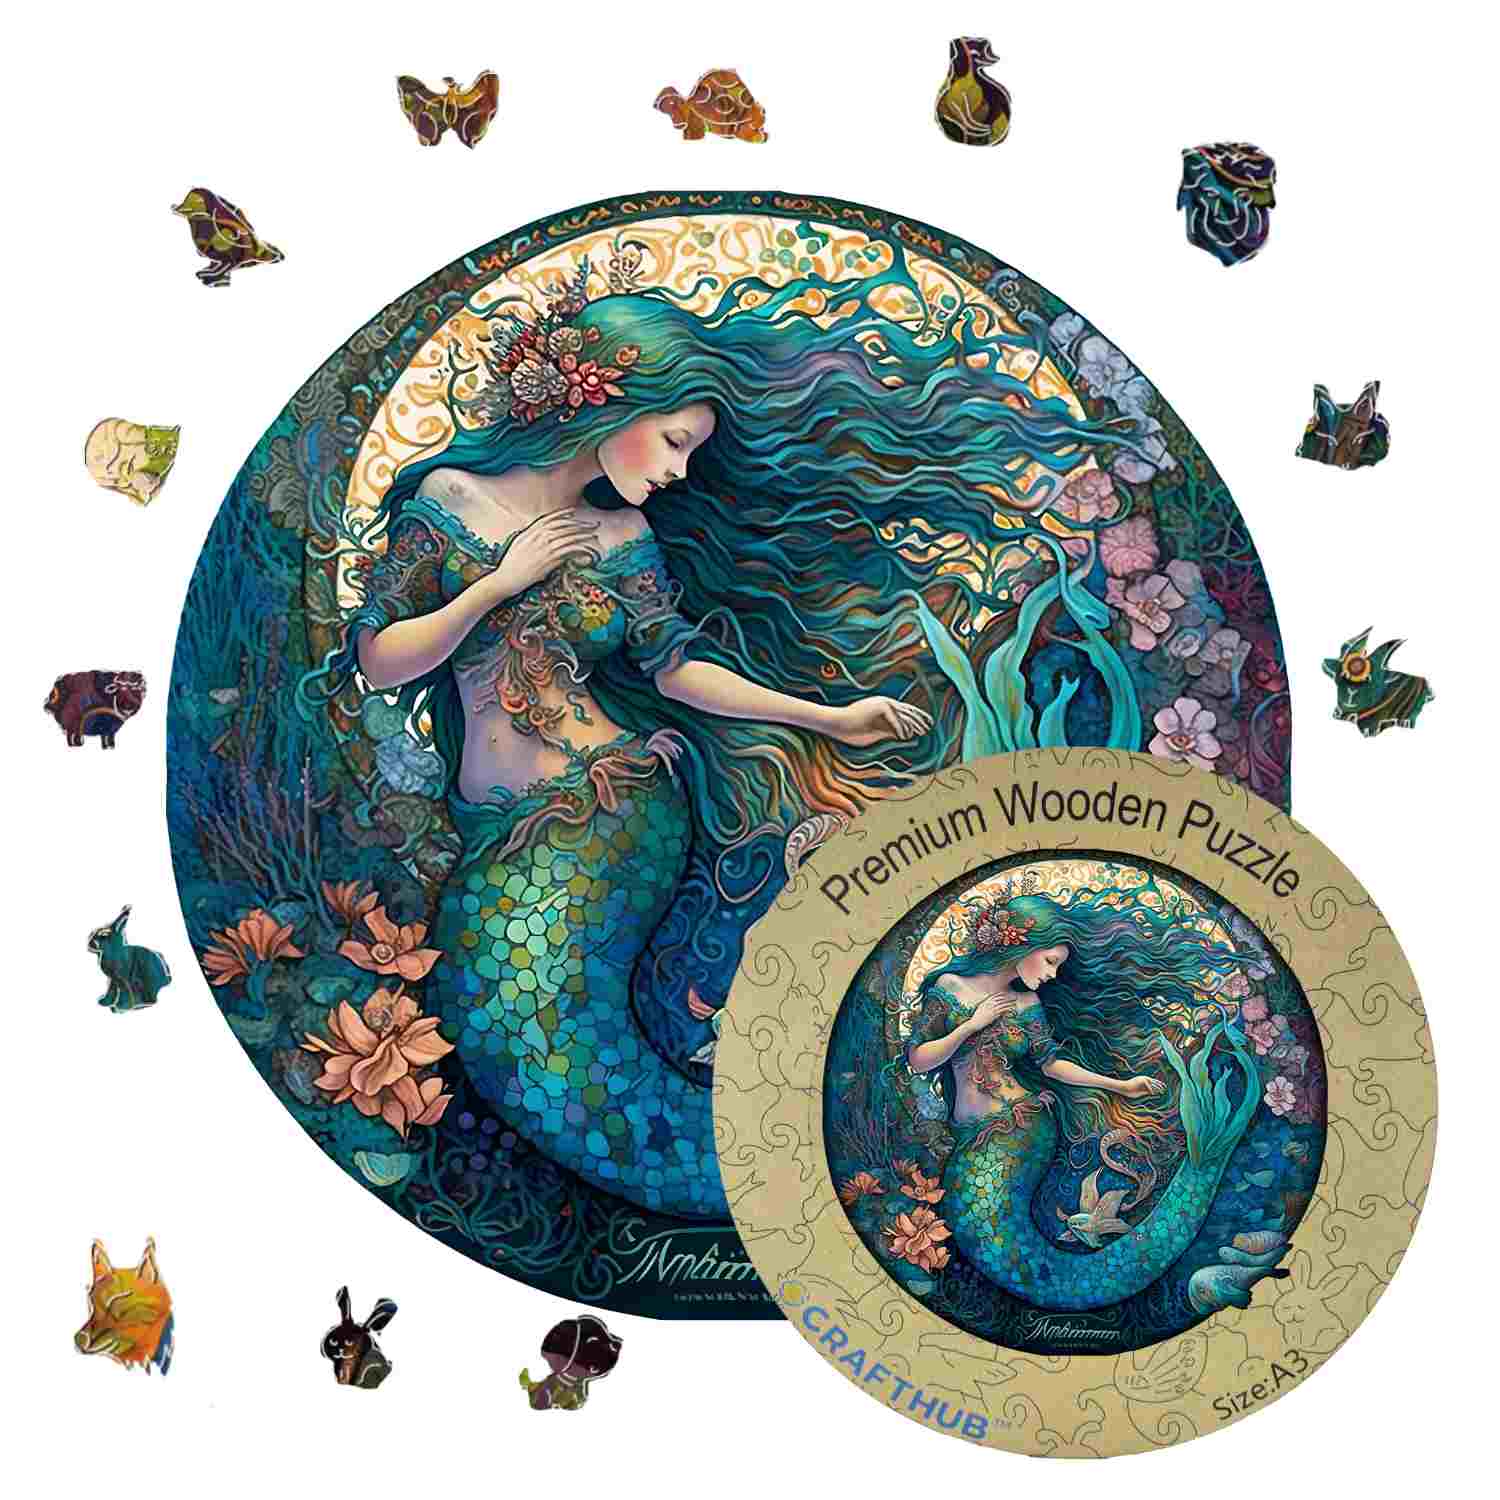 Animal Jigsaw Puzzle > Wooden Jigsaw Puzzle > Jigsaw Puzzle A3+Wooden Box Mermaid - Jigsaw Puzzle